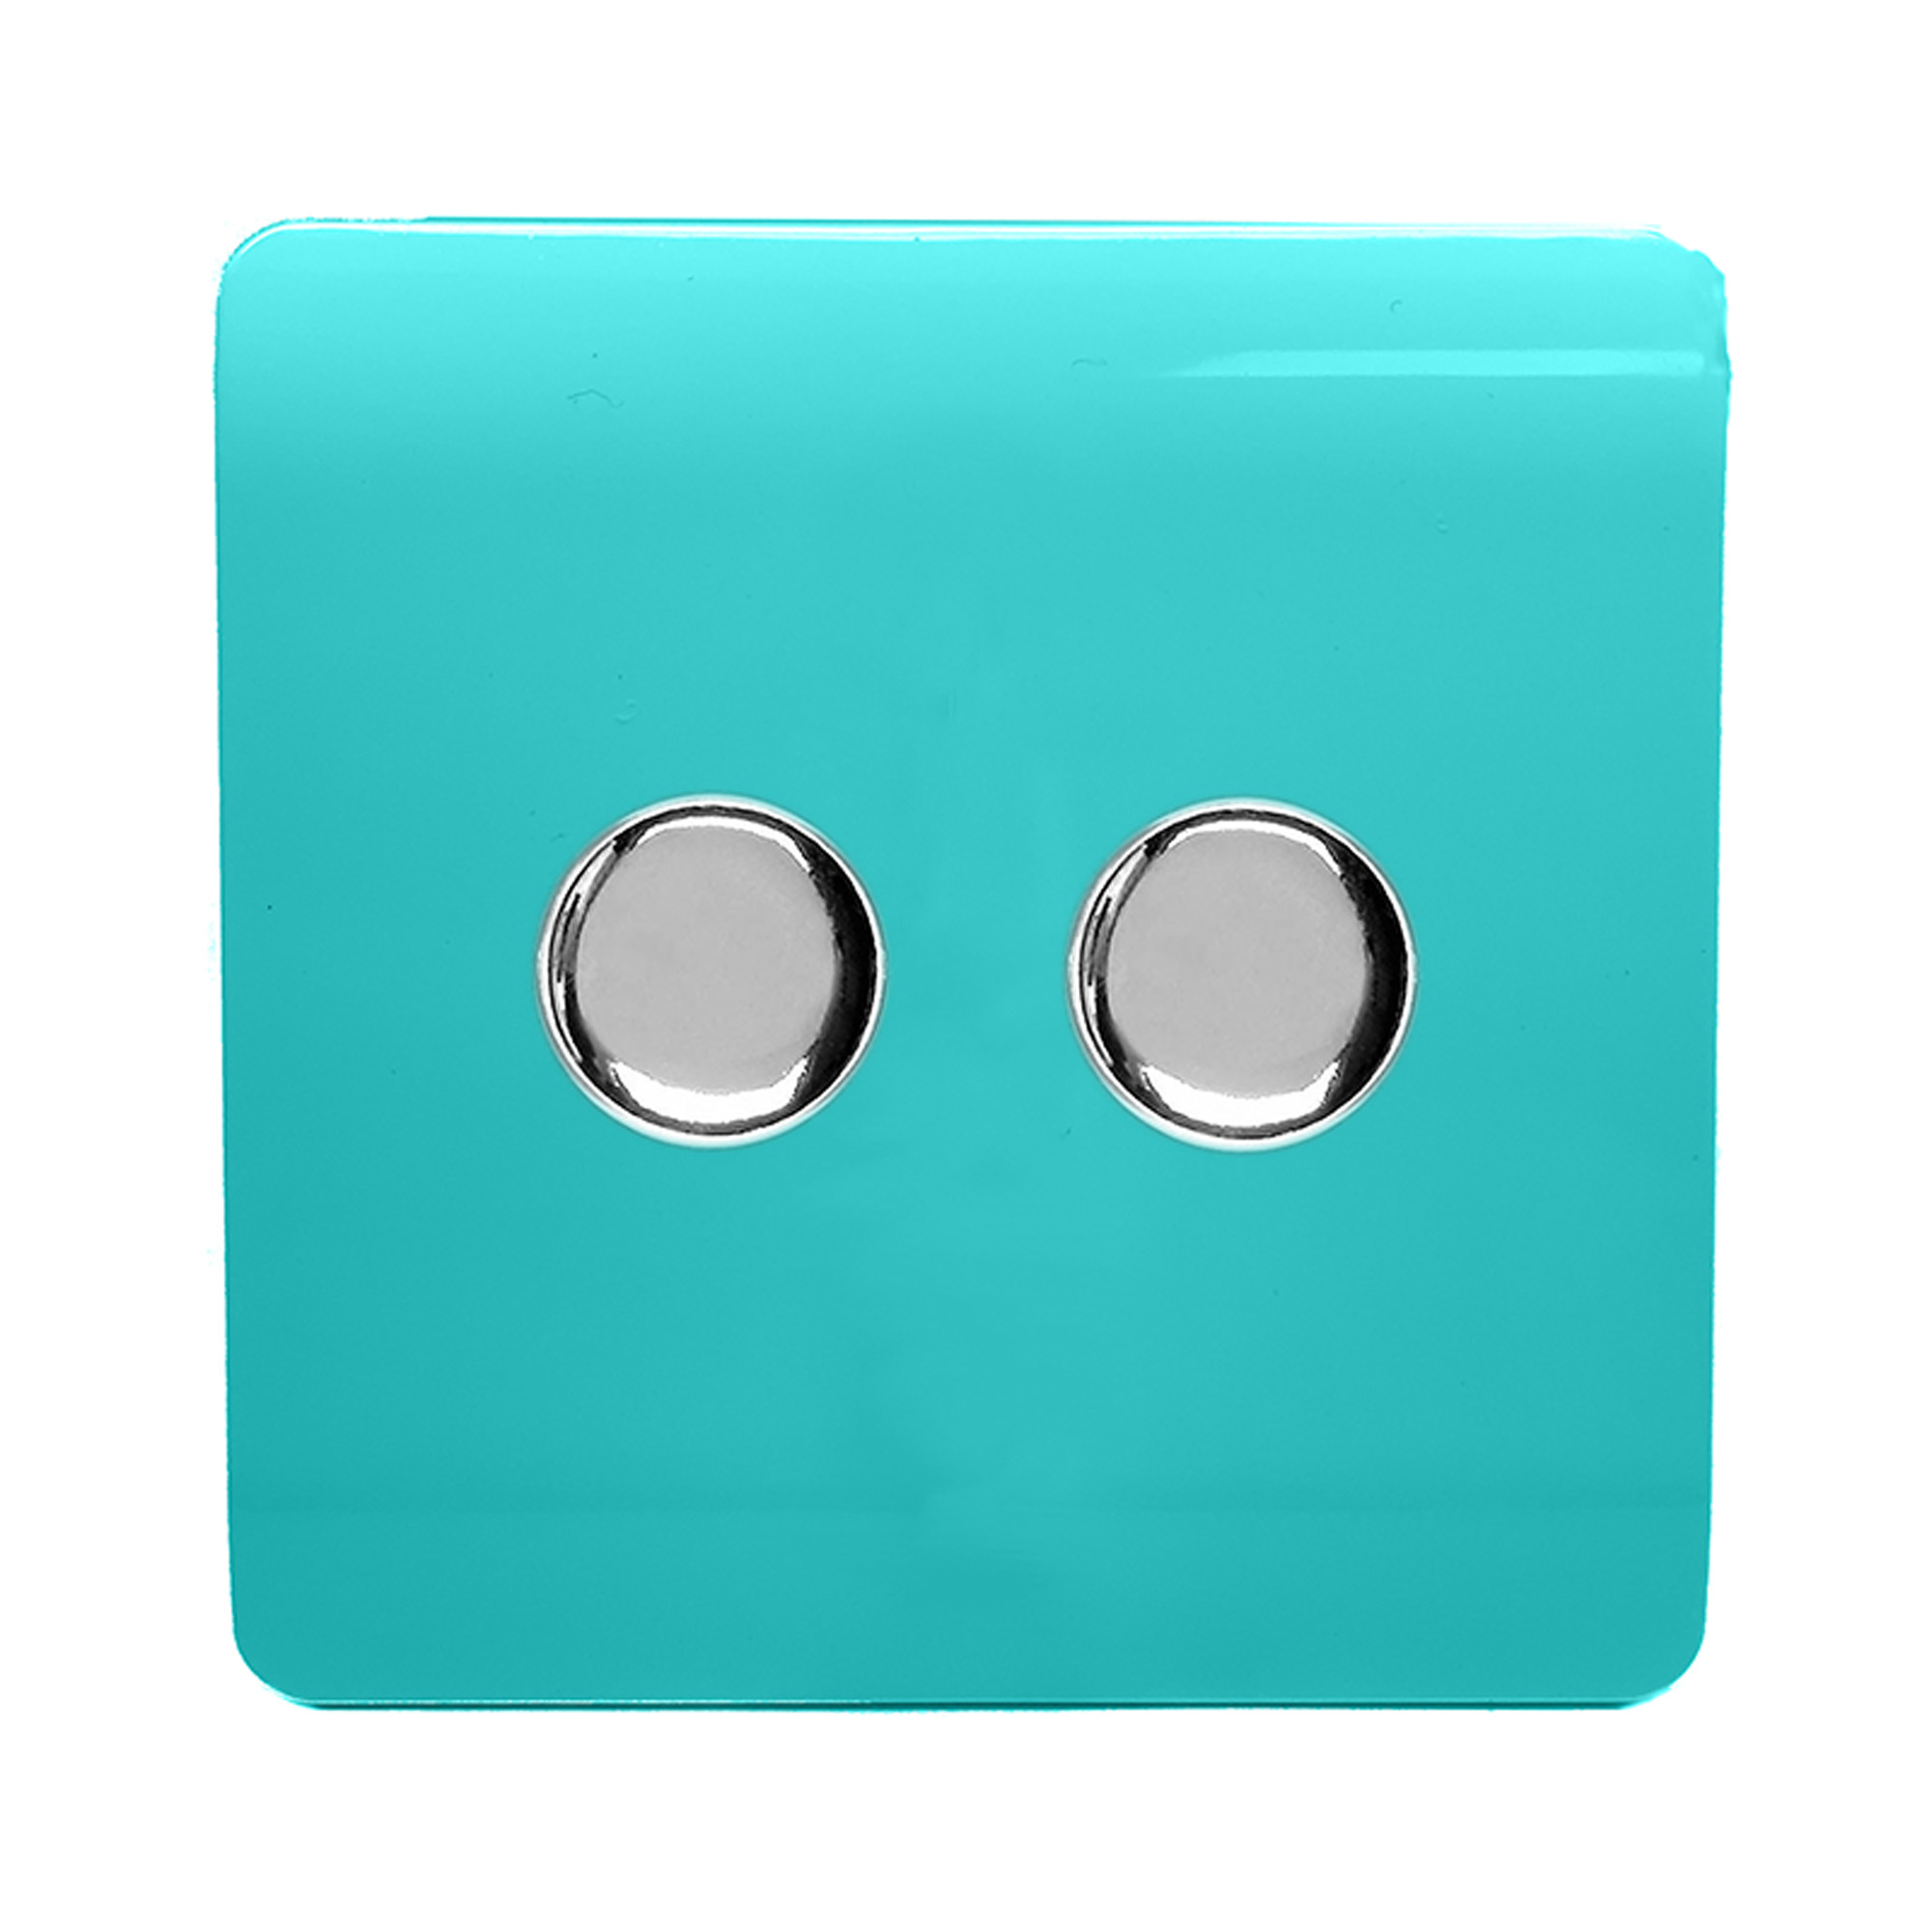 ART-2LDMBT  2 Gang 2 Way LED Dimmer Switch Bright Teal